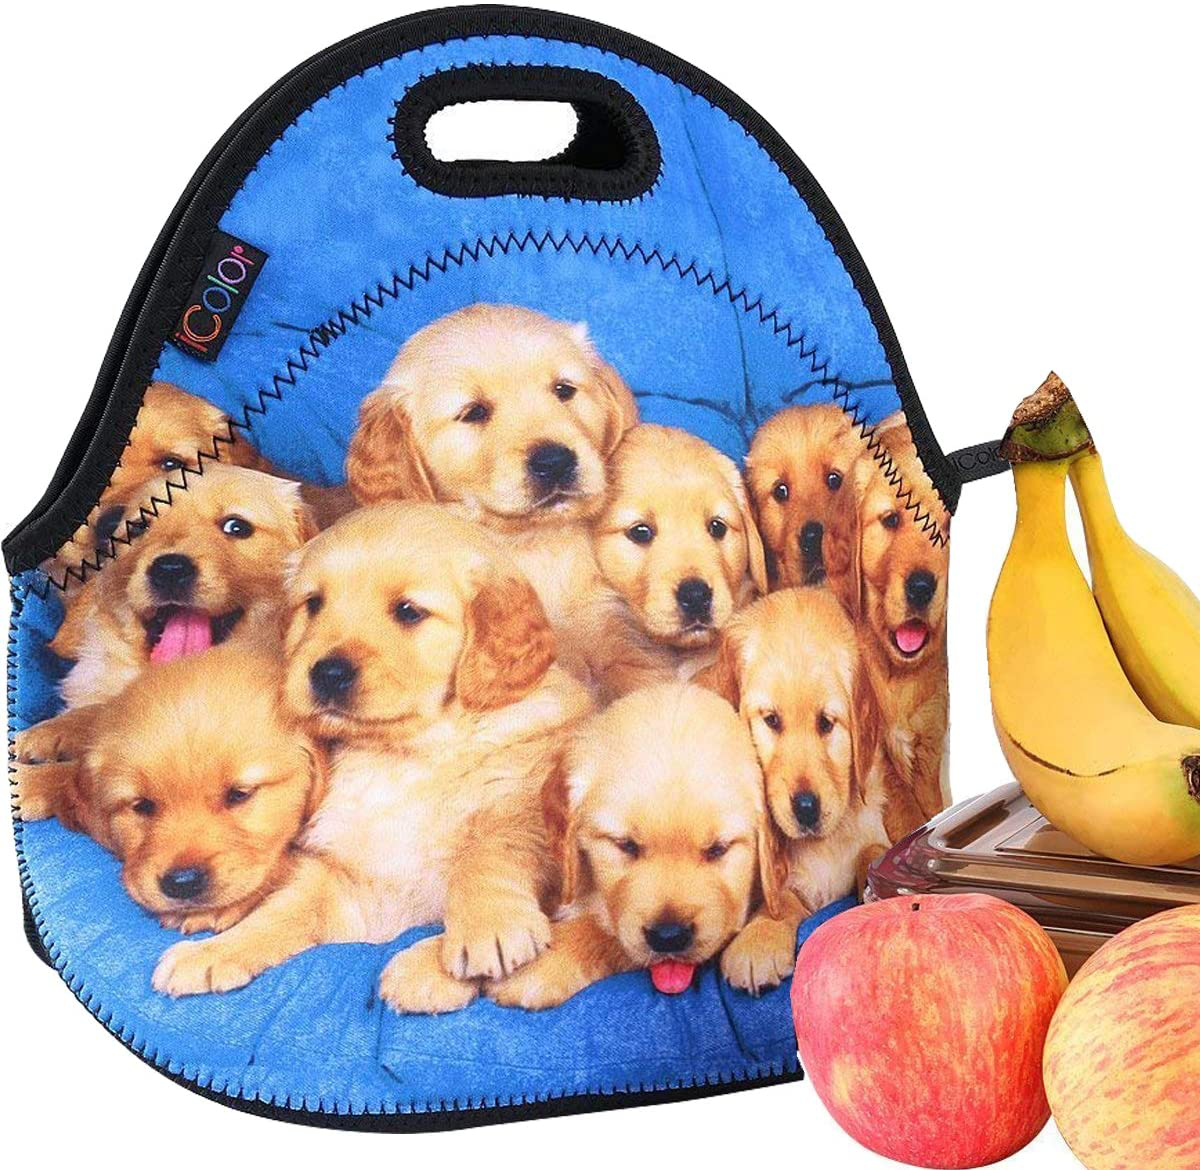 iColor Lovely Small Dogs Neoprene Insulated Waterproof Cooler Box Container Soft Case baby lunchbox Handbag Work Travel Outdoor Thermal Lunch Tote Bag School/Office Storage Pouch Food Carrying YLB-56